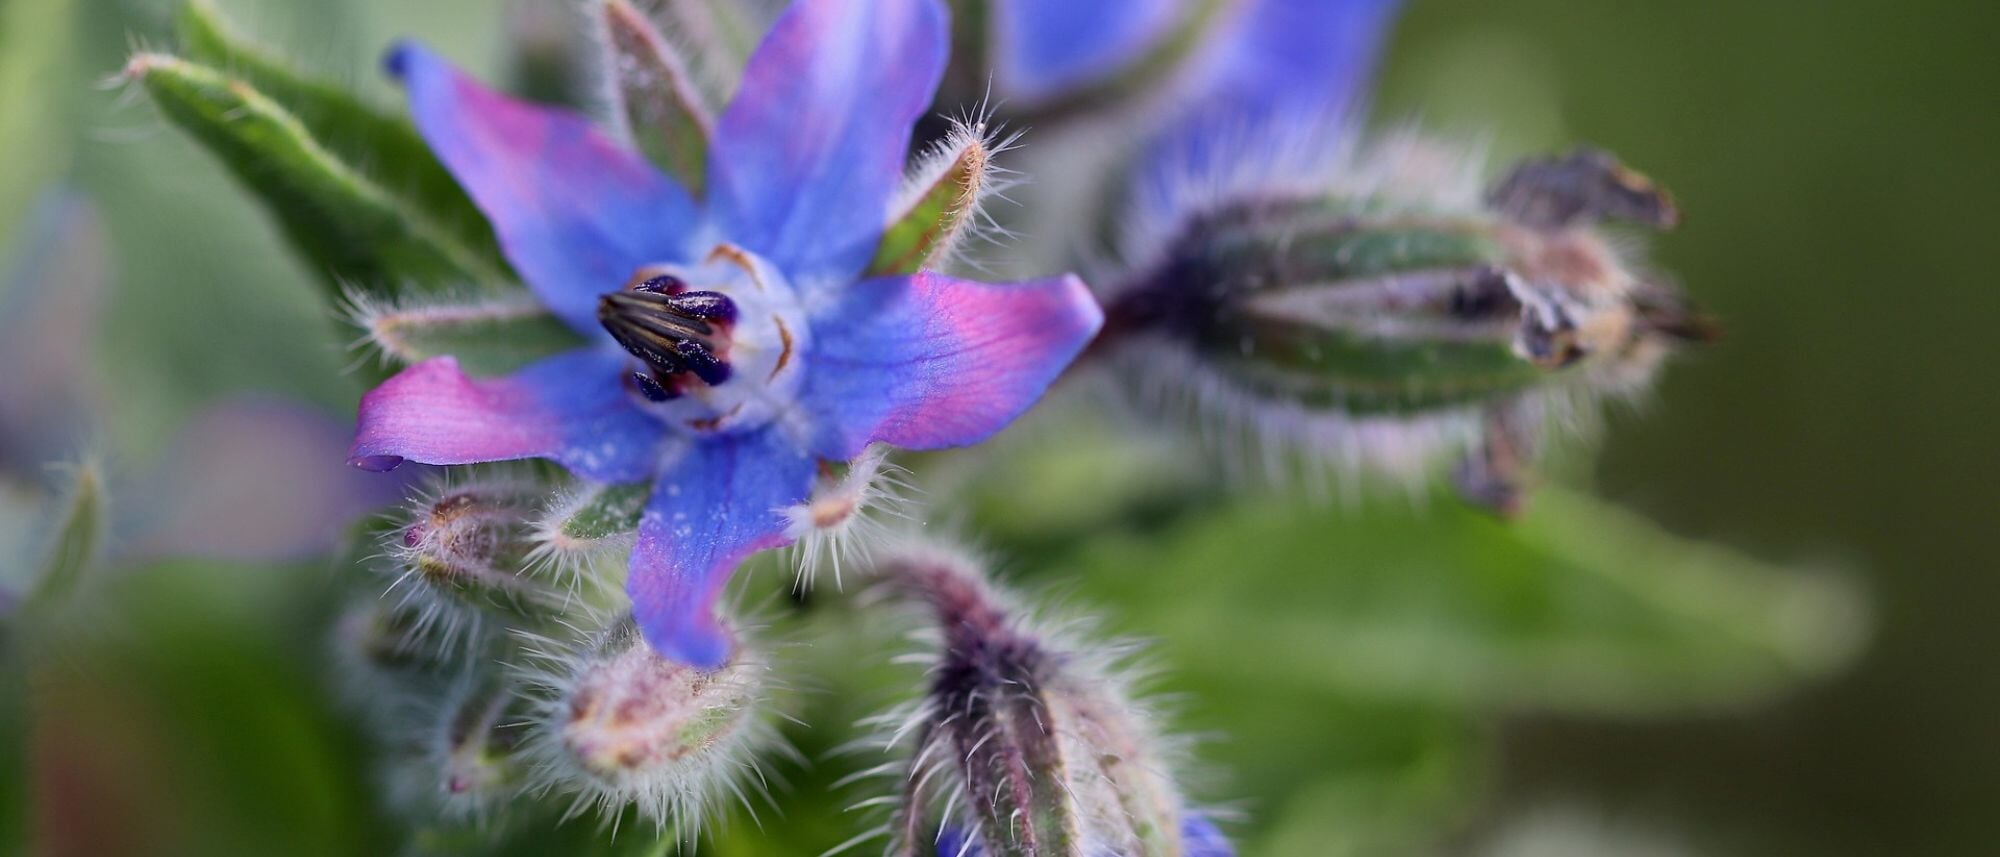 Grow borage at home to add to your baking or create home remedies